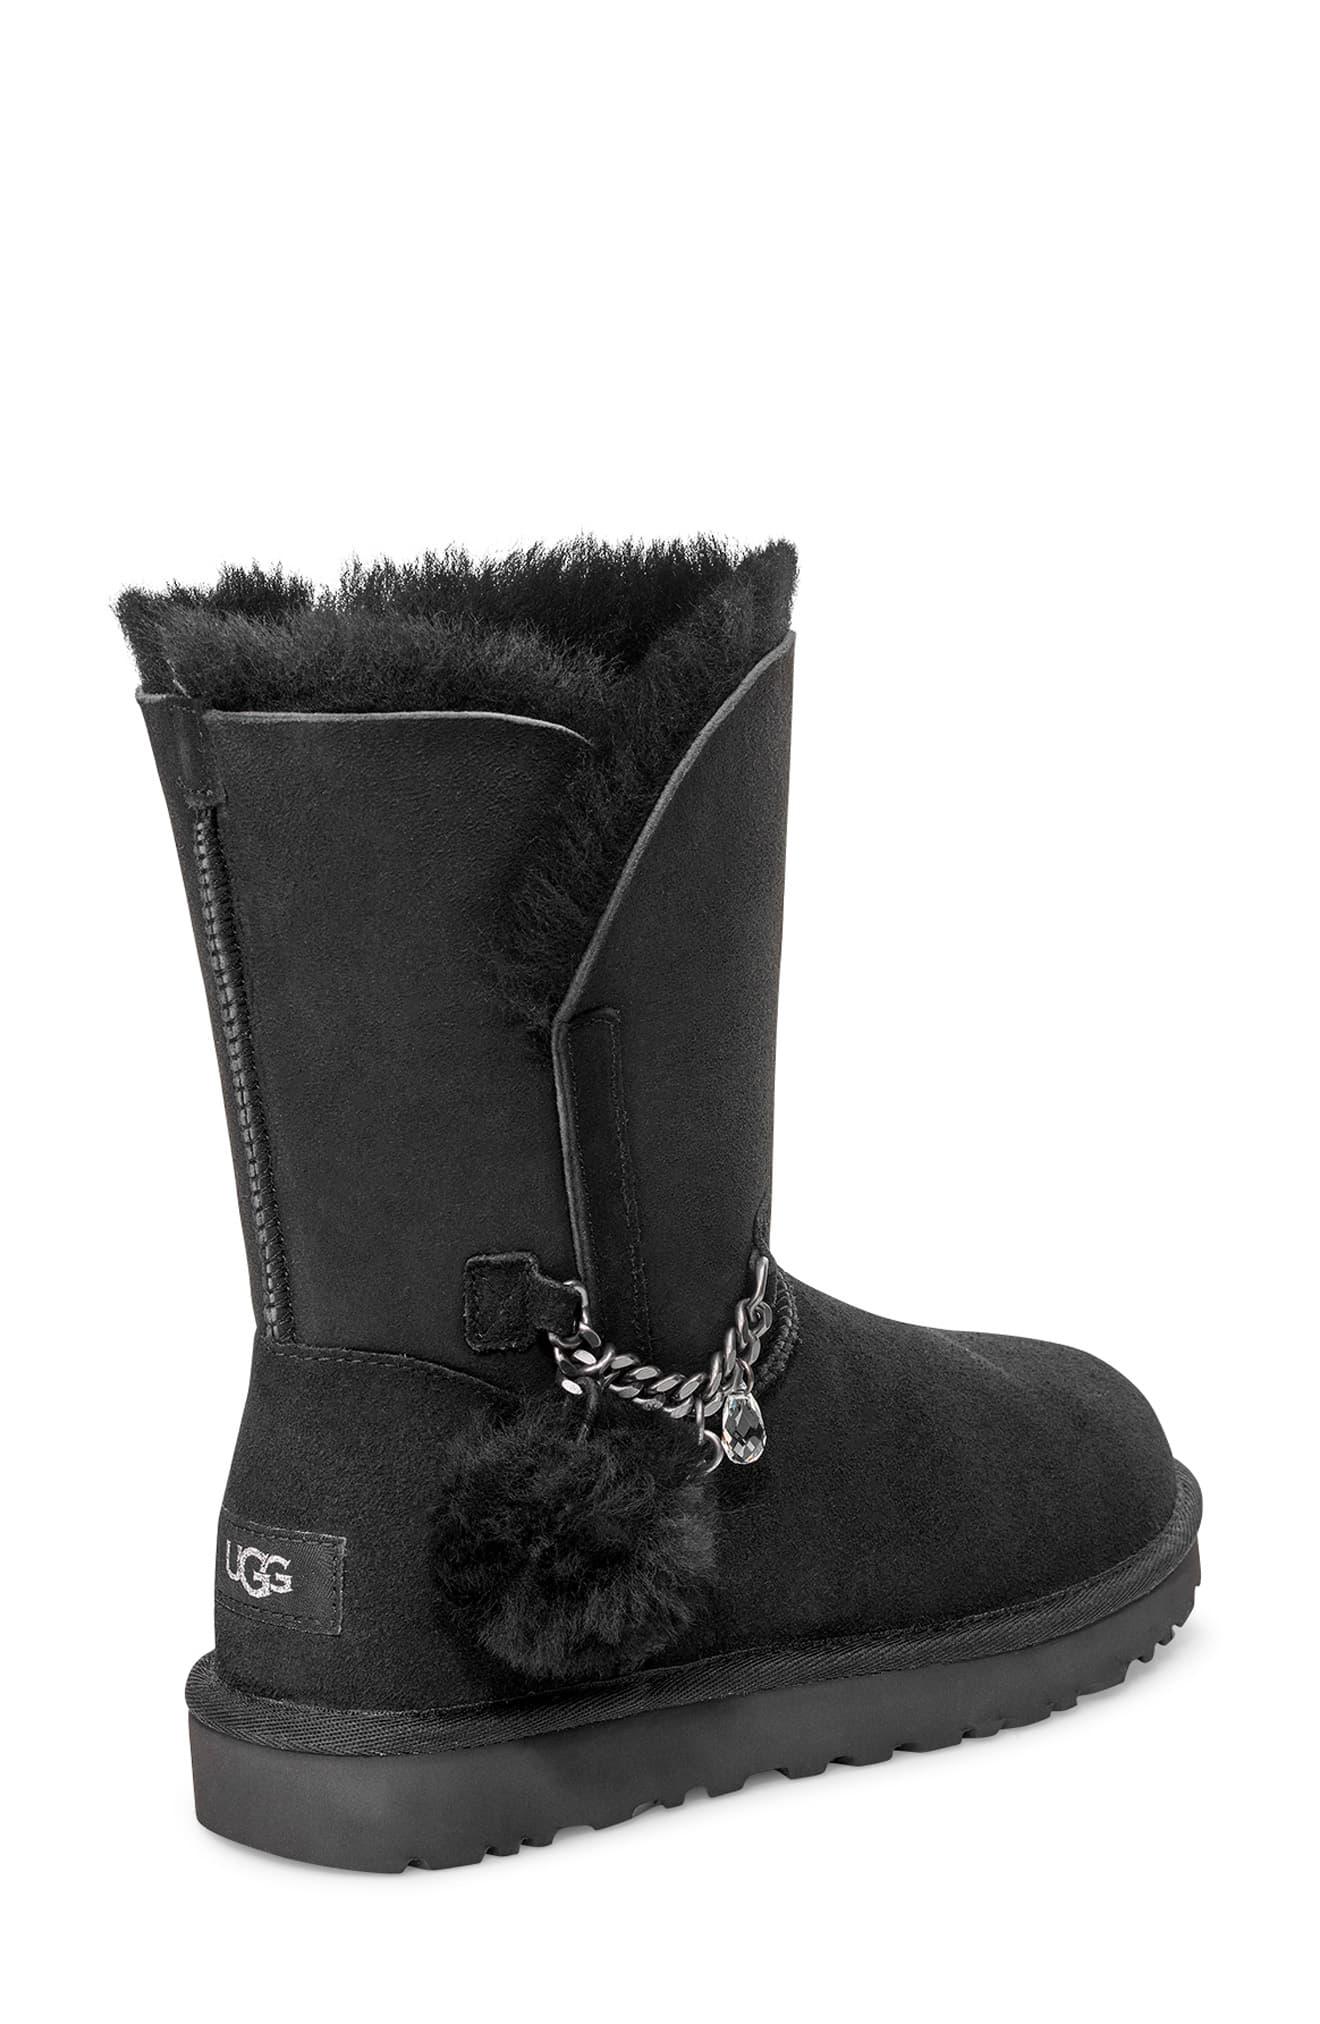 black ugg boots with charms